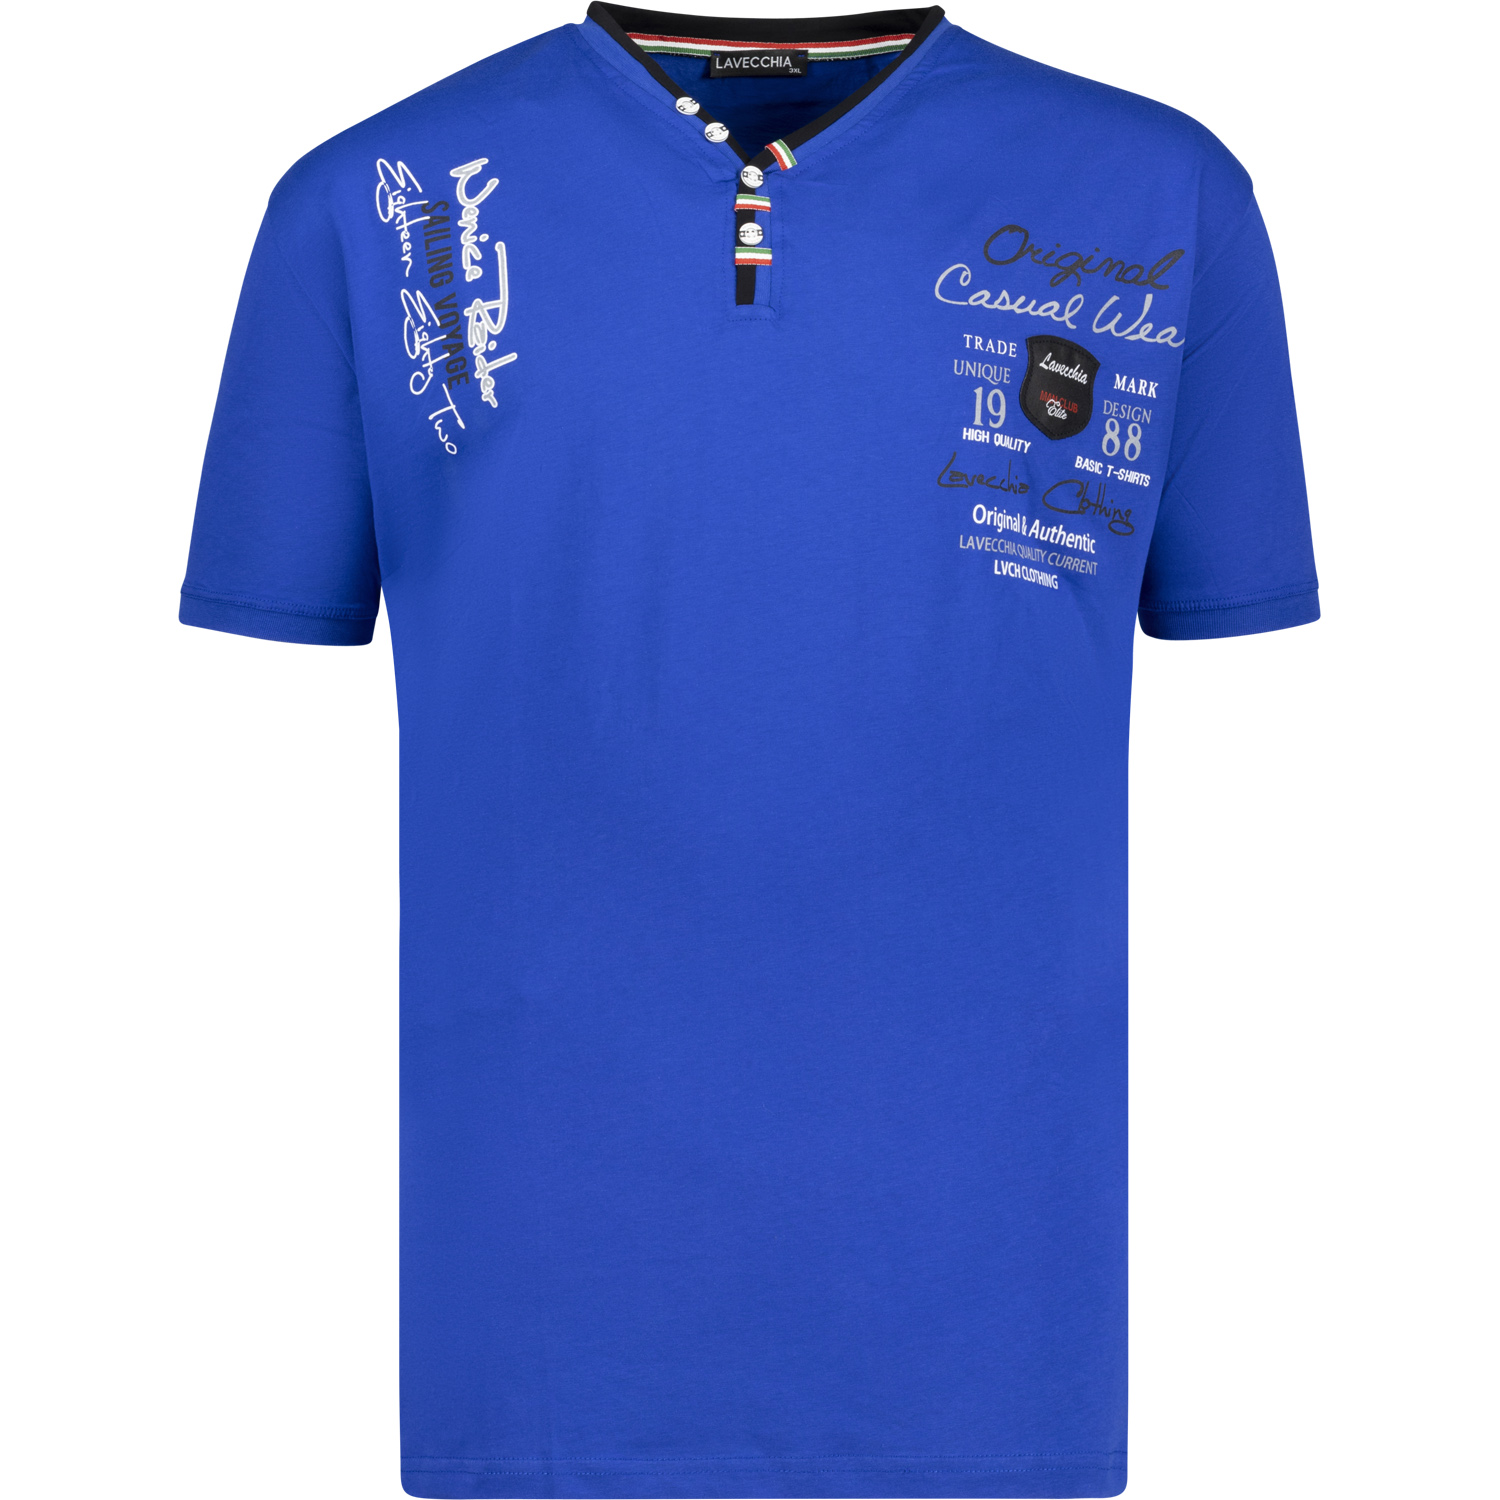 T-shirt in royal blue for men by Lavecchia in oversize up to 8XL with front print